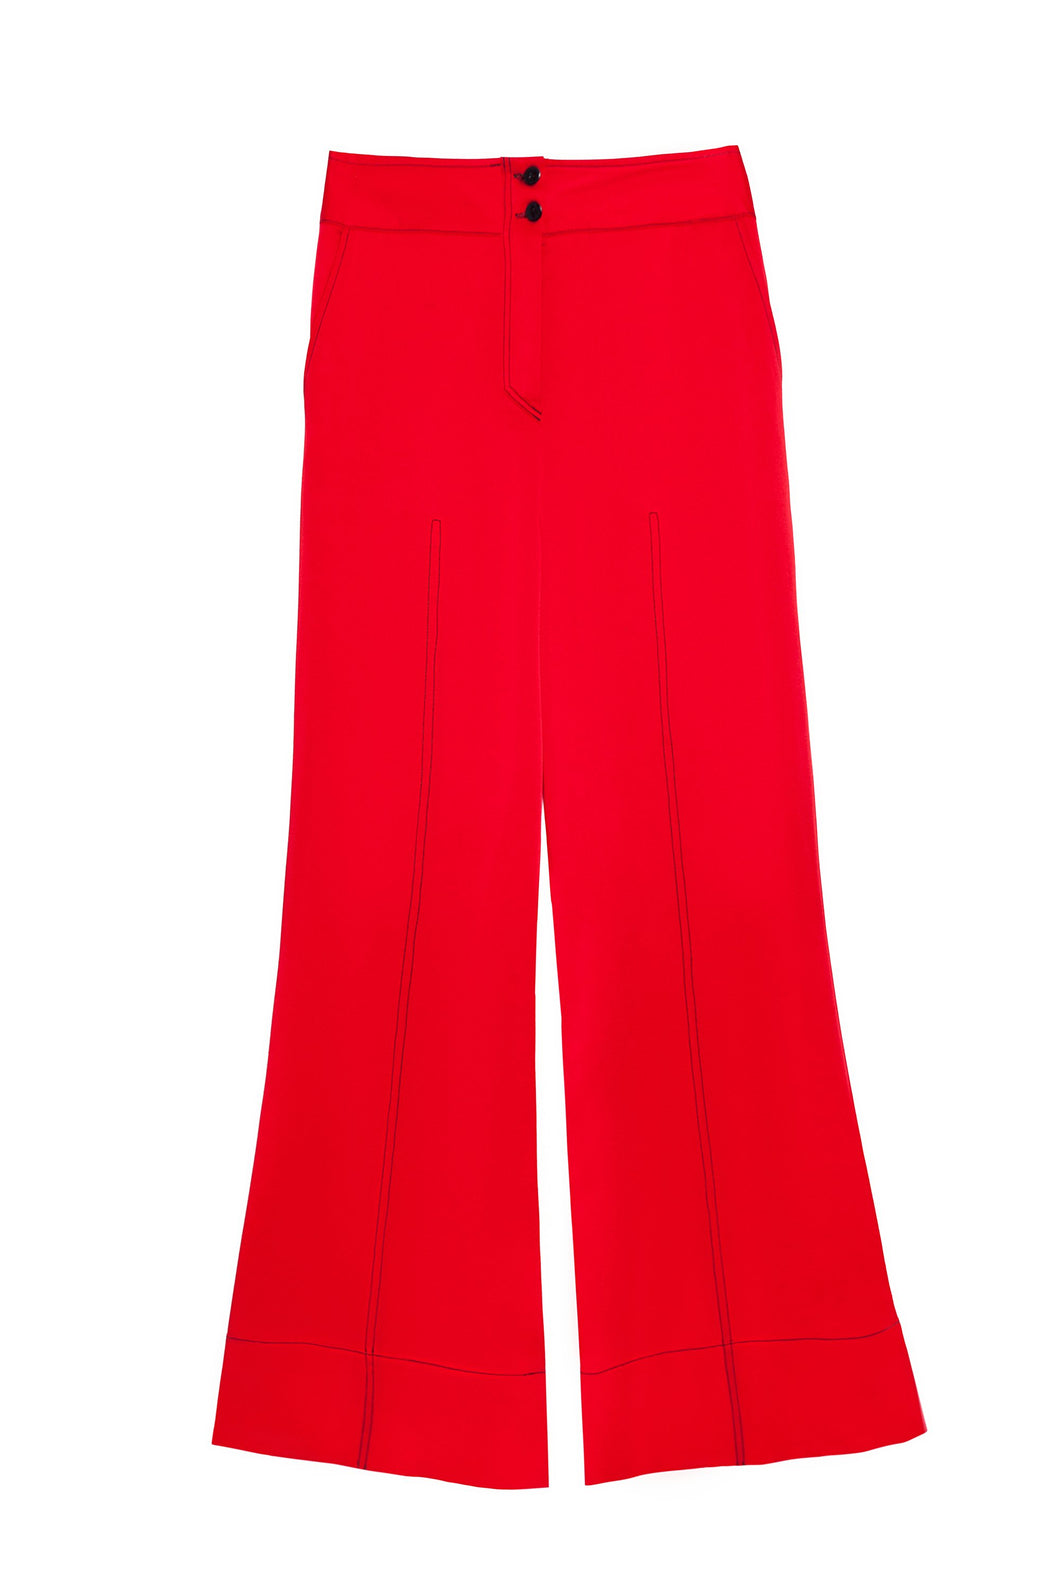 50% OFF  70's style pants red